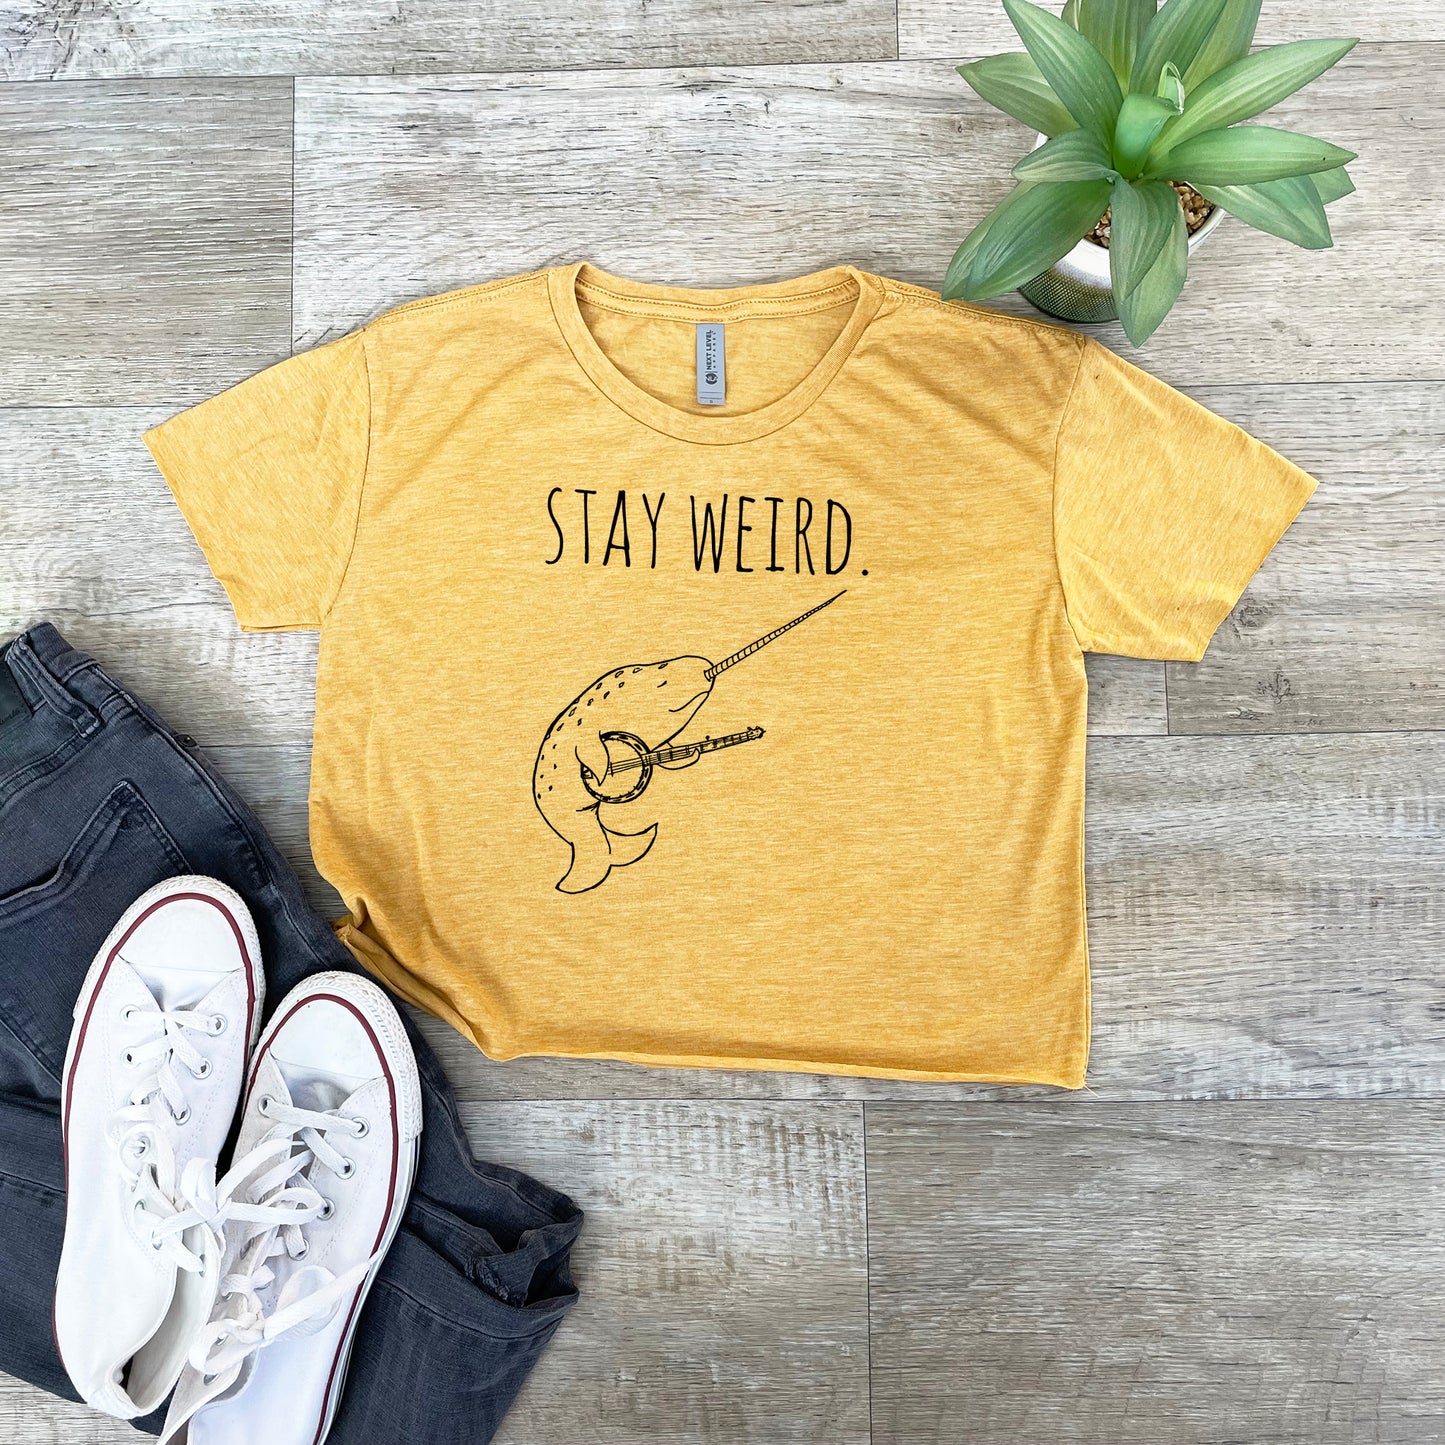 Stay Weird (Narwhal / Banjo) - Women's Crop Tee - Heather Gray or Gold